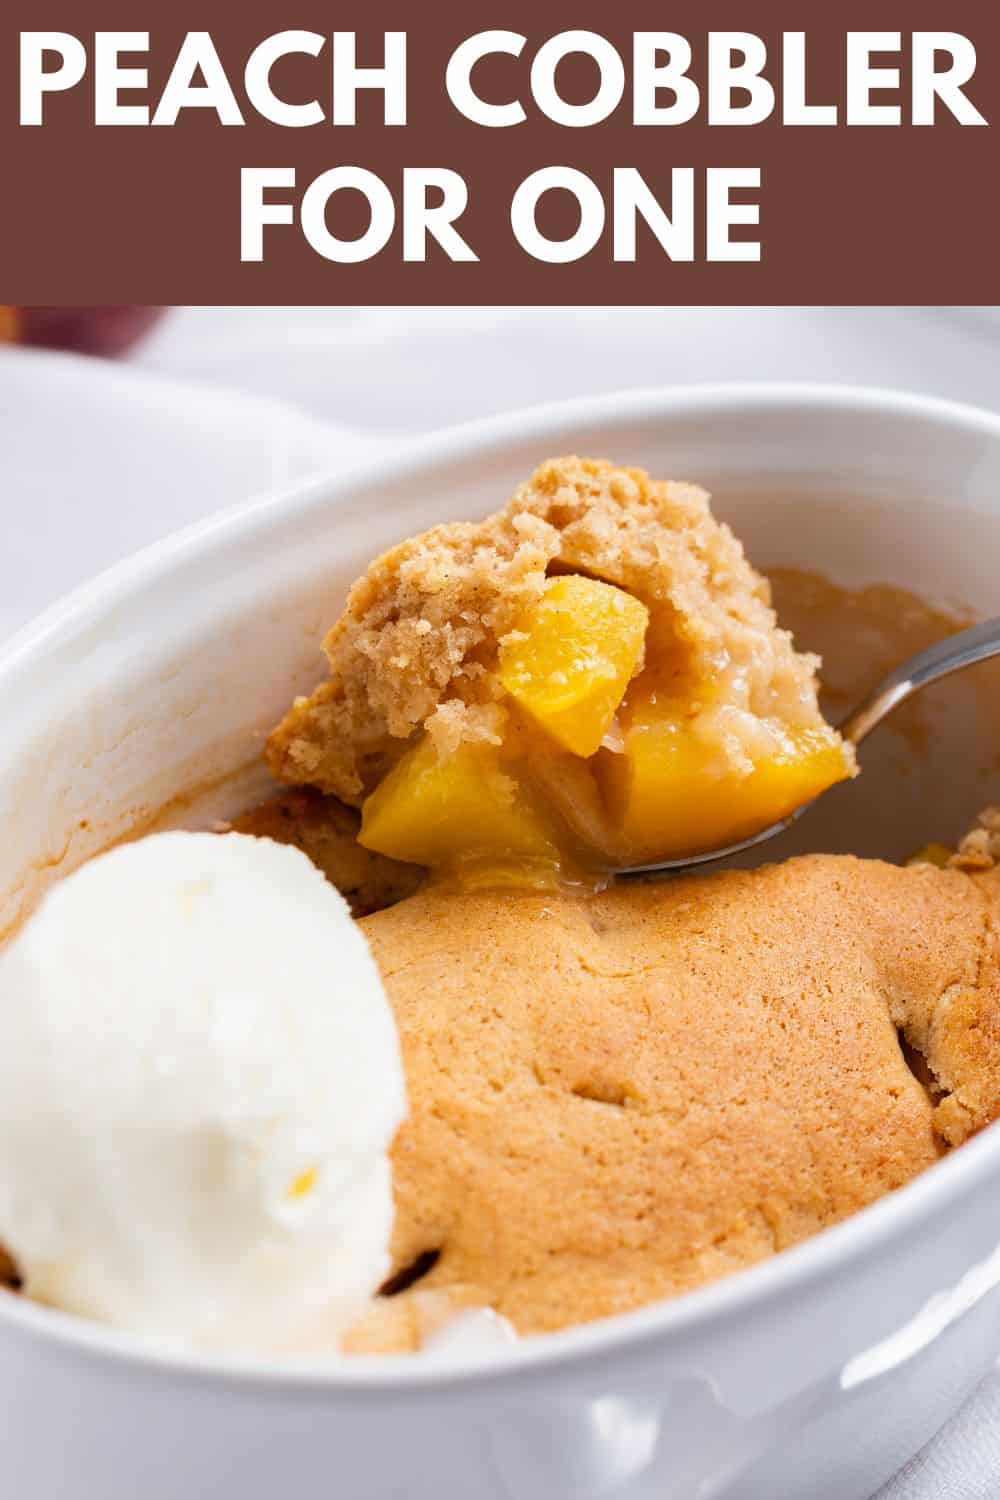 A delectable peach cobbler recipe specifically tailored for a single serving.